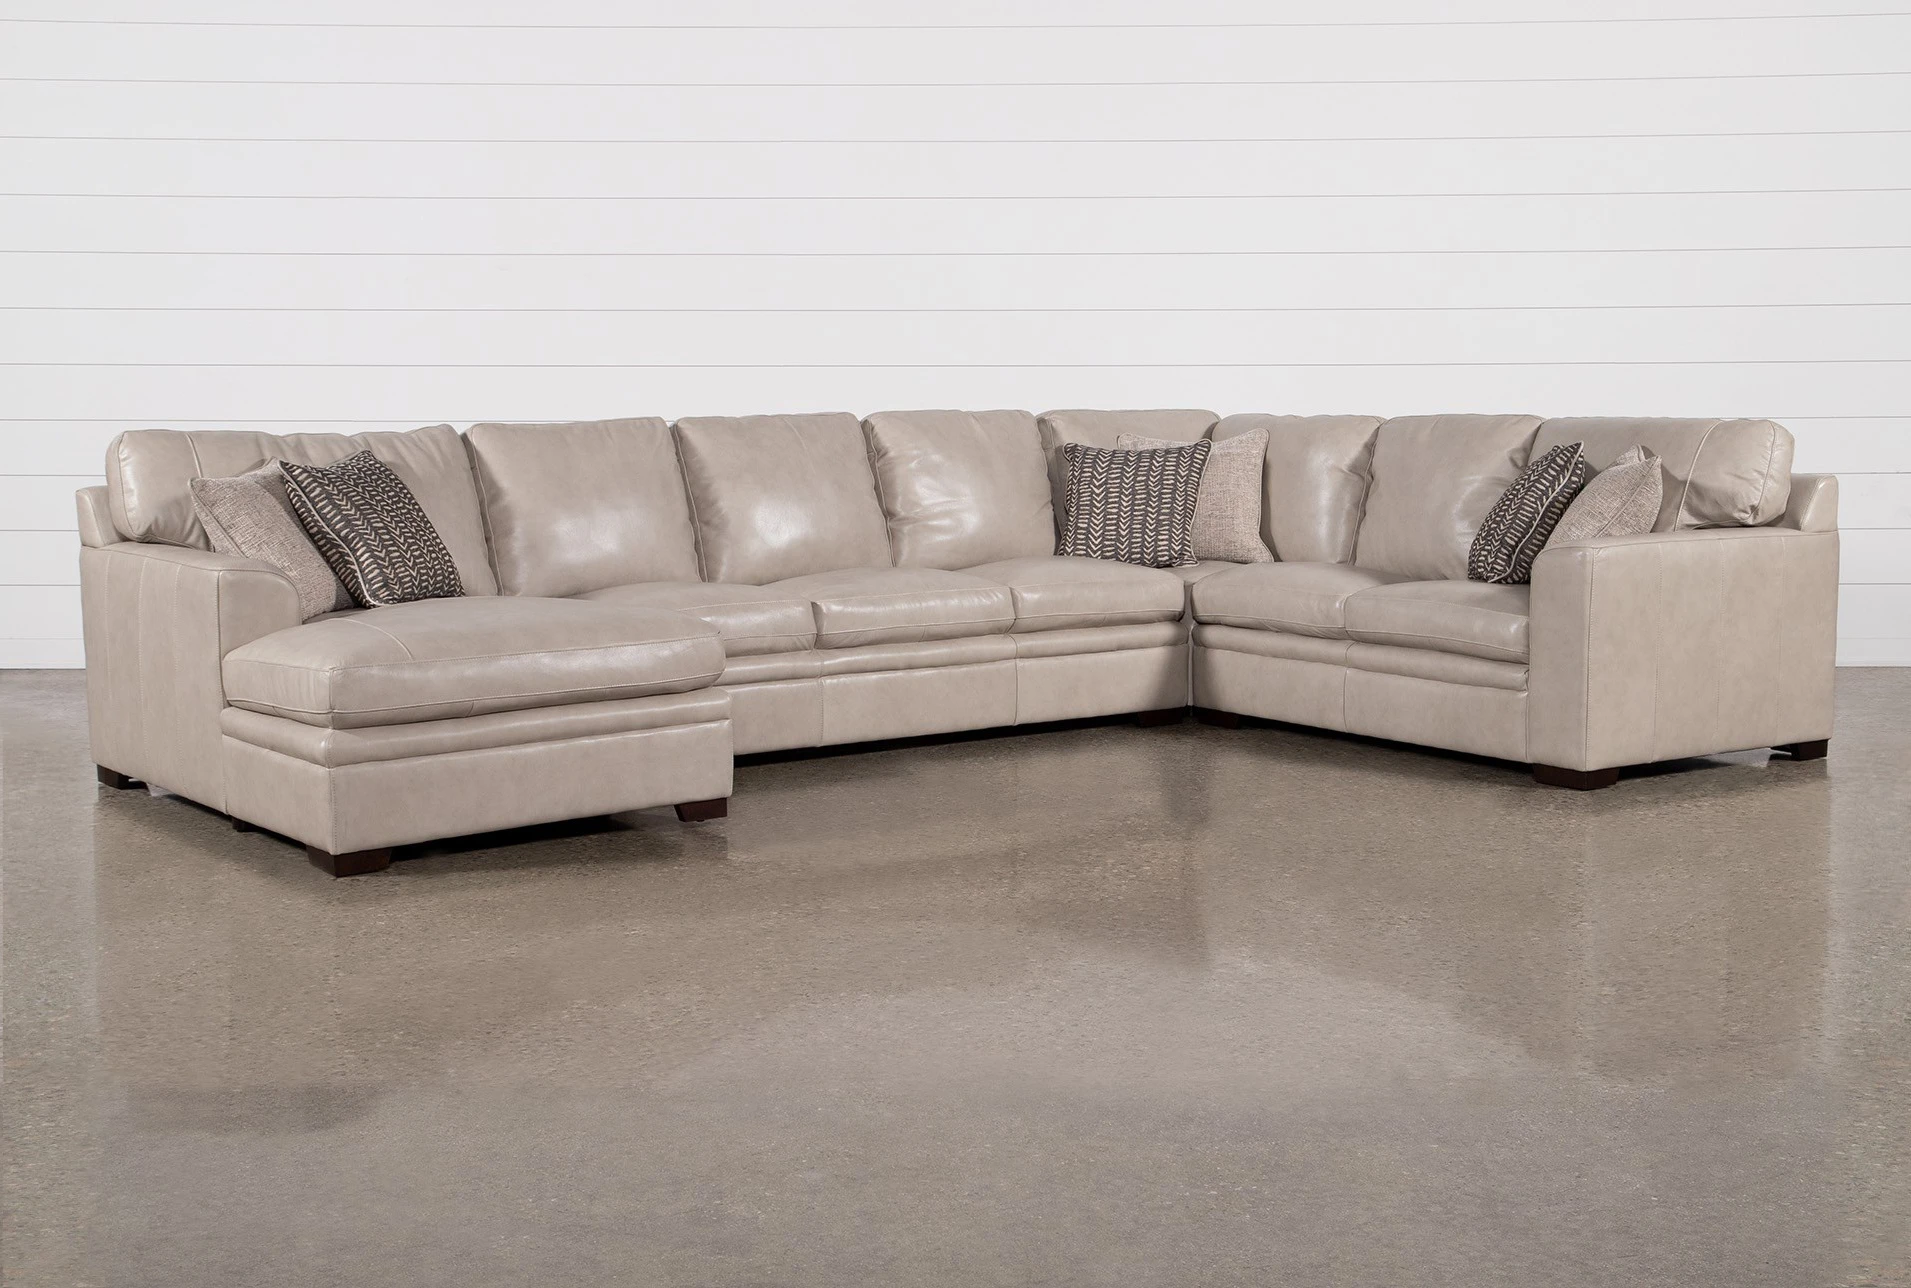 Greer Stone Leather 4 Piece 171, Leather Sectional Living Room Furniture